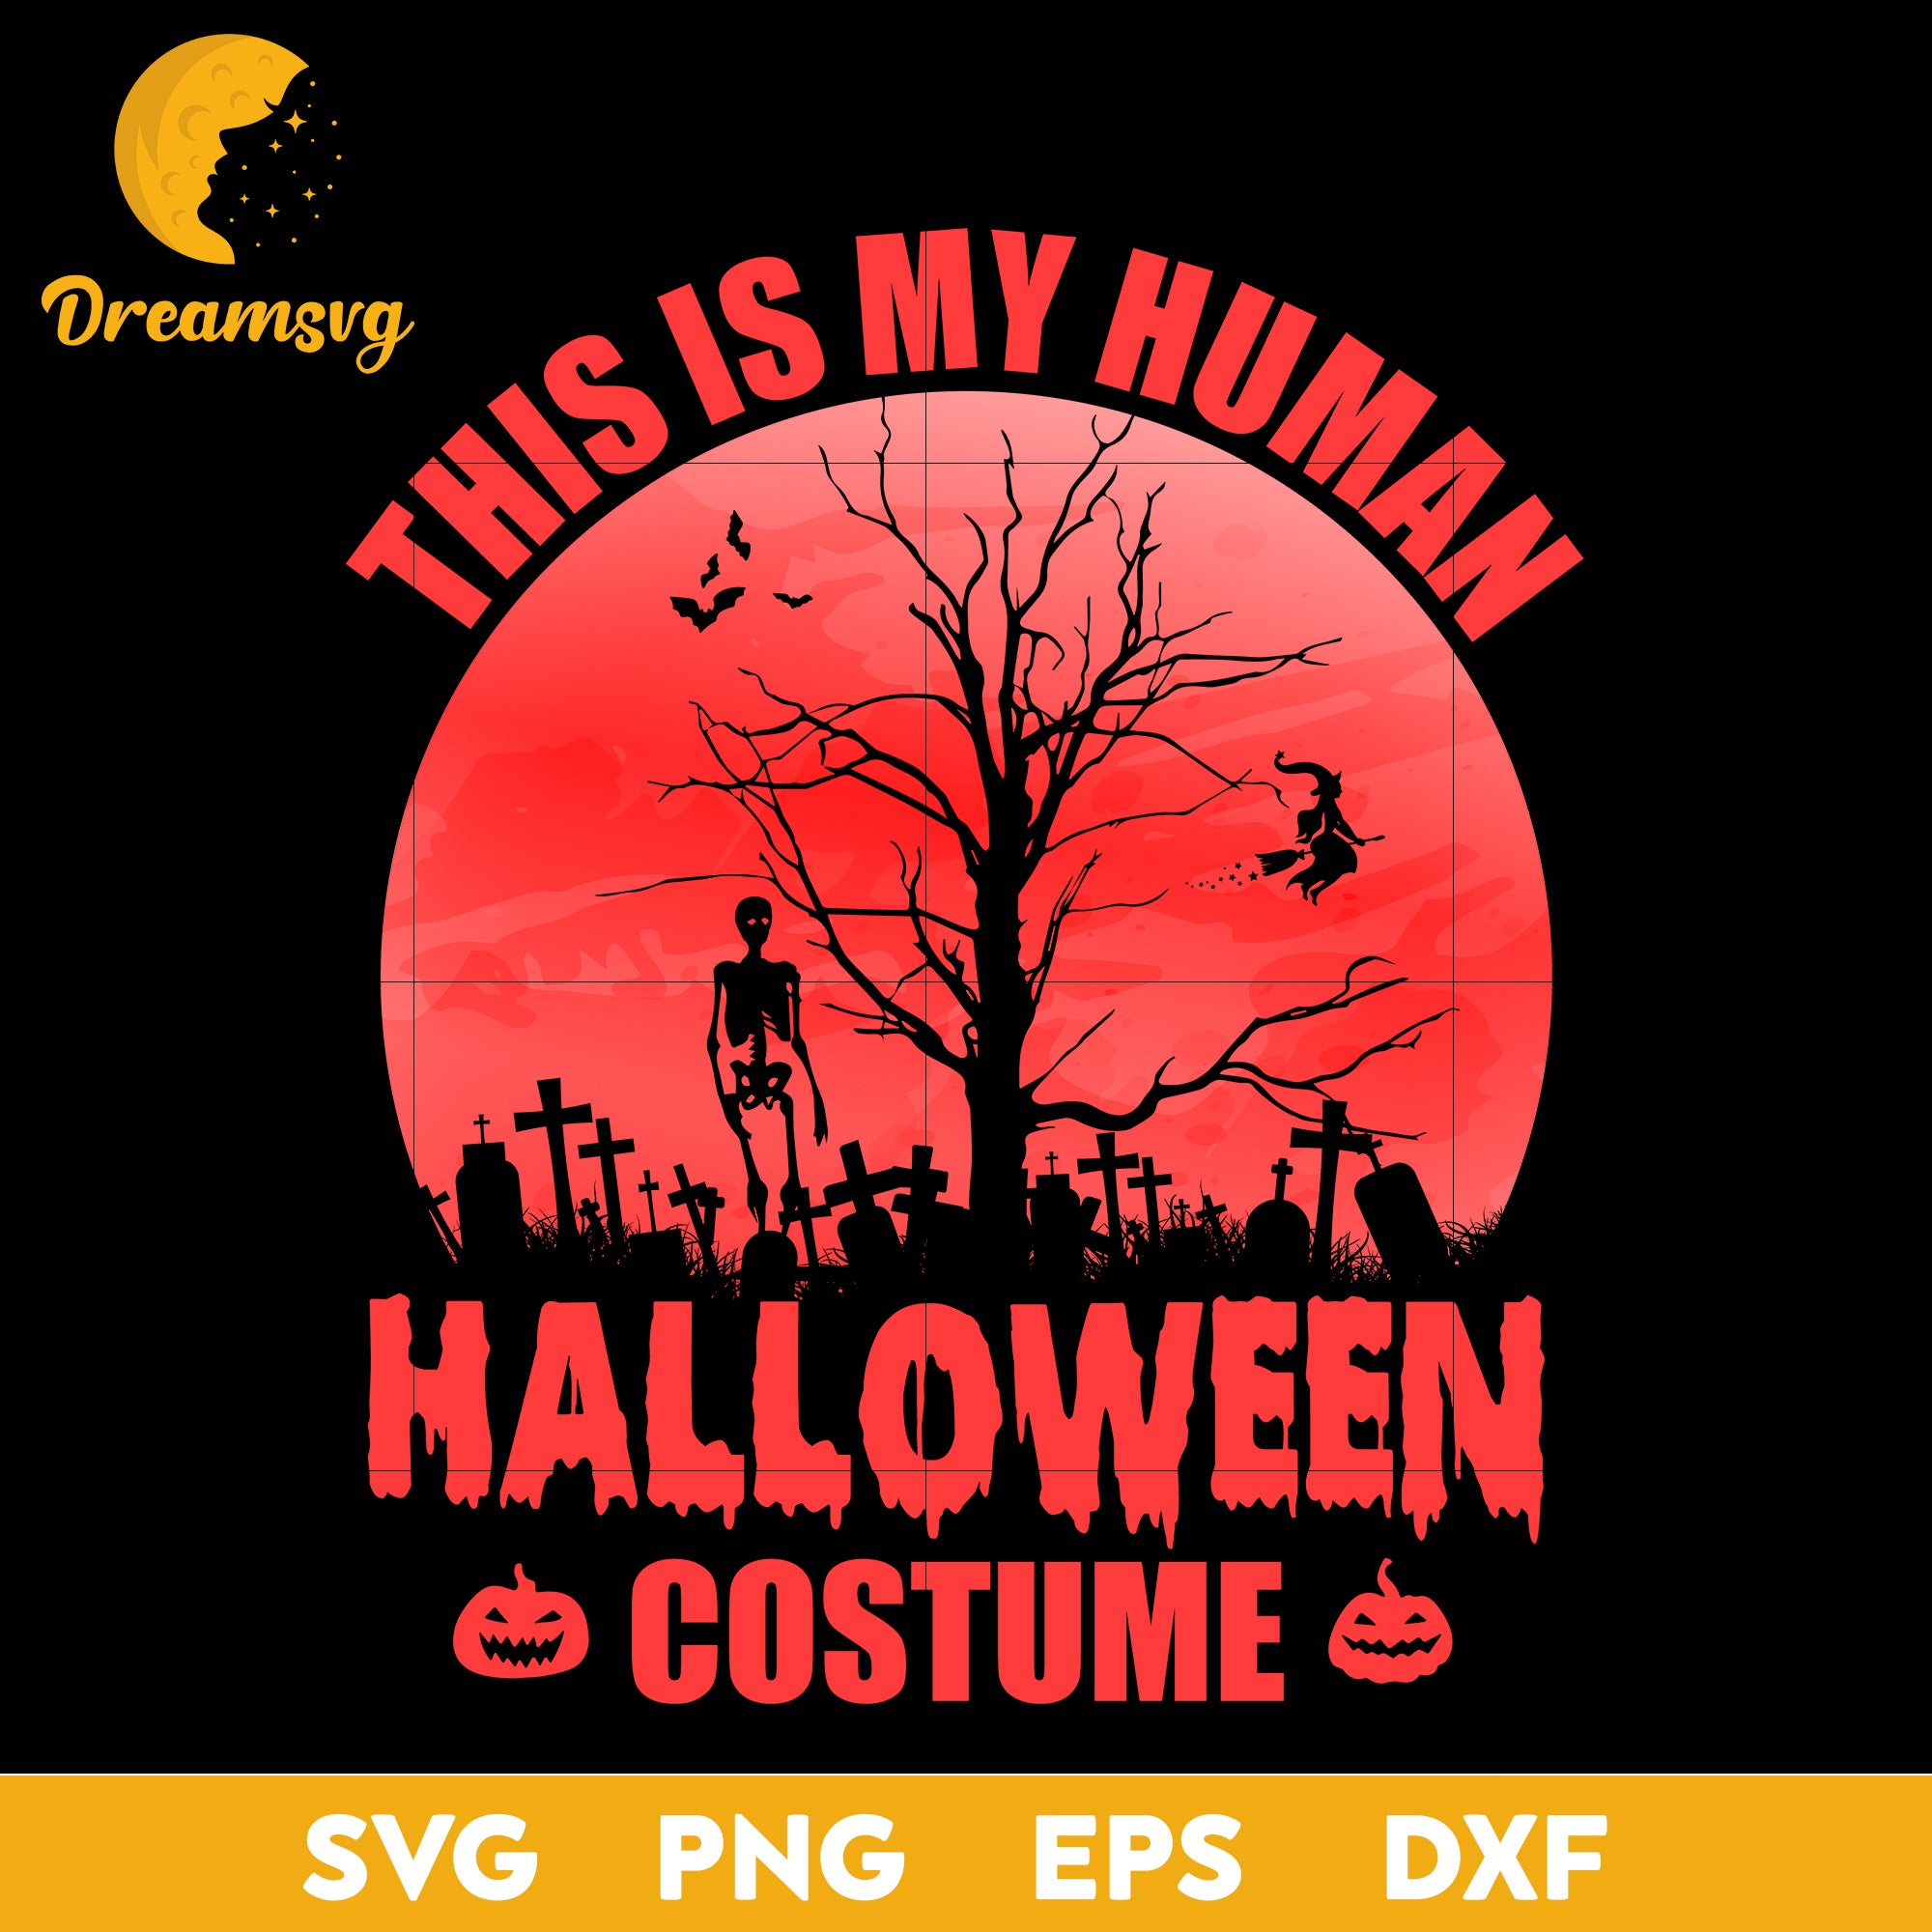 This is my human halloween costume svg, Halloween svg, png, dxf, eps digital file.